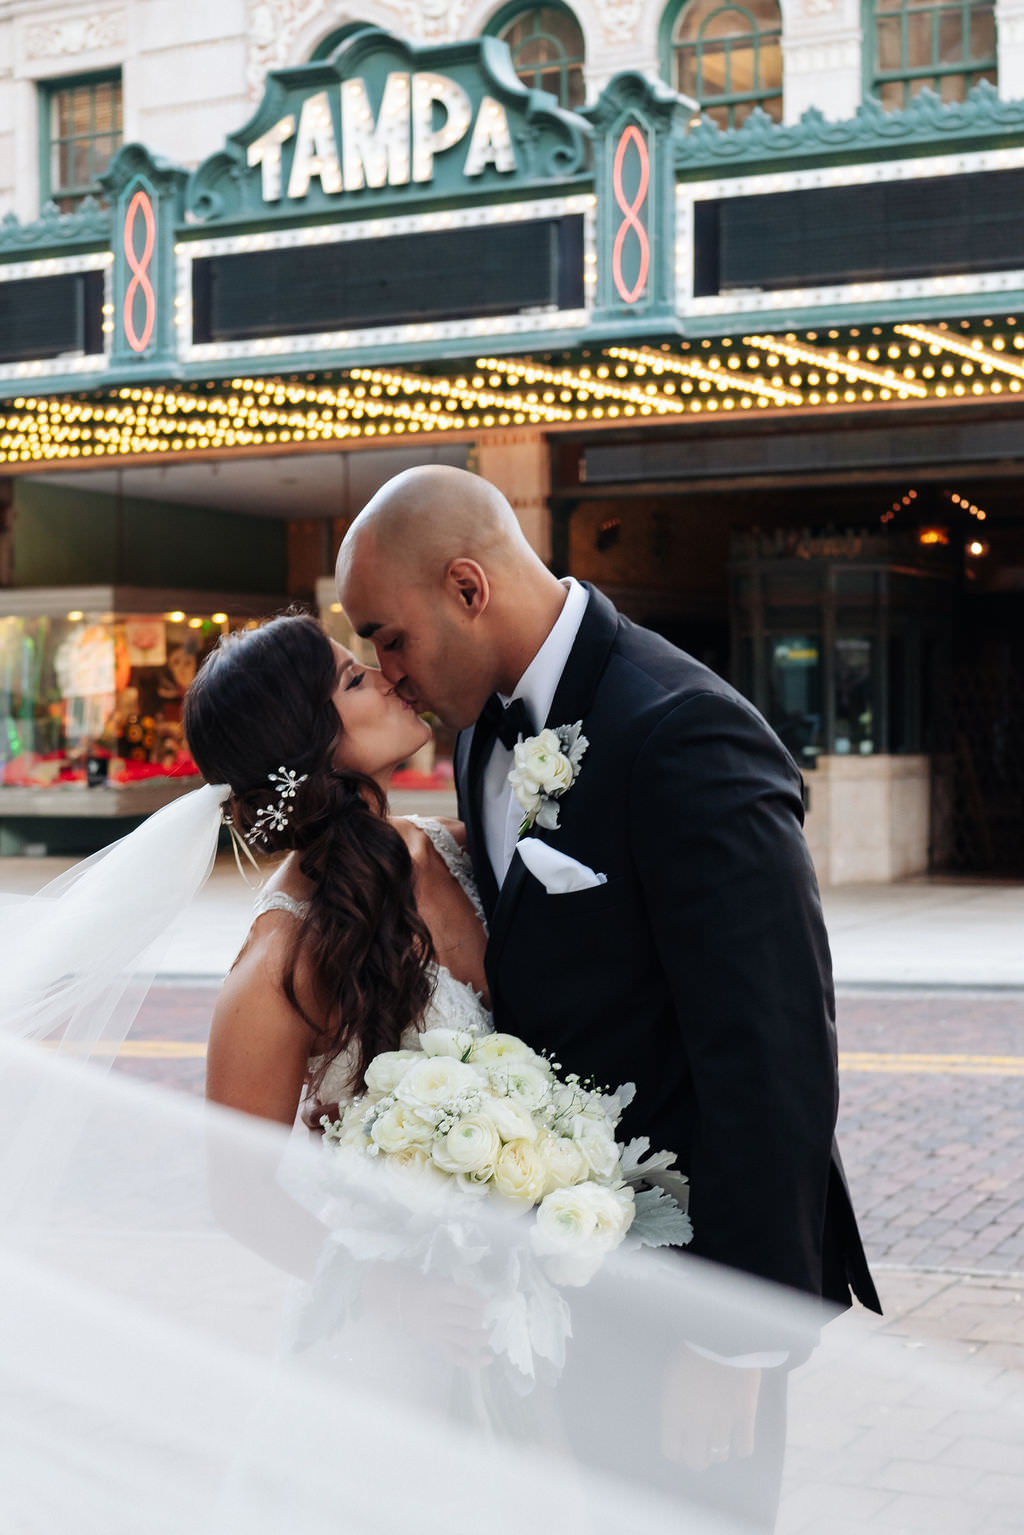 Florida Bride and Groom Intimate Wedding Portrait with Veil Flare, Kissing Outside of Historic Tampa Theatre, Carrying White and Ivory Rose Bouquet with Baby's Breath and Greenery | Photographer Grind & Press Photography